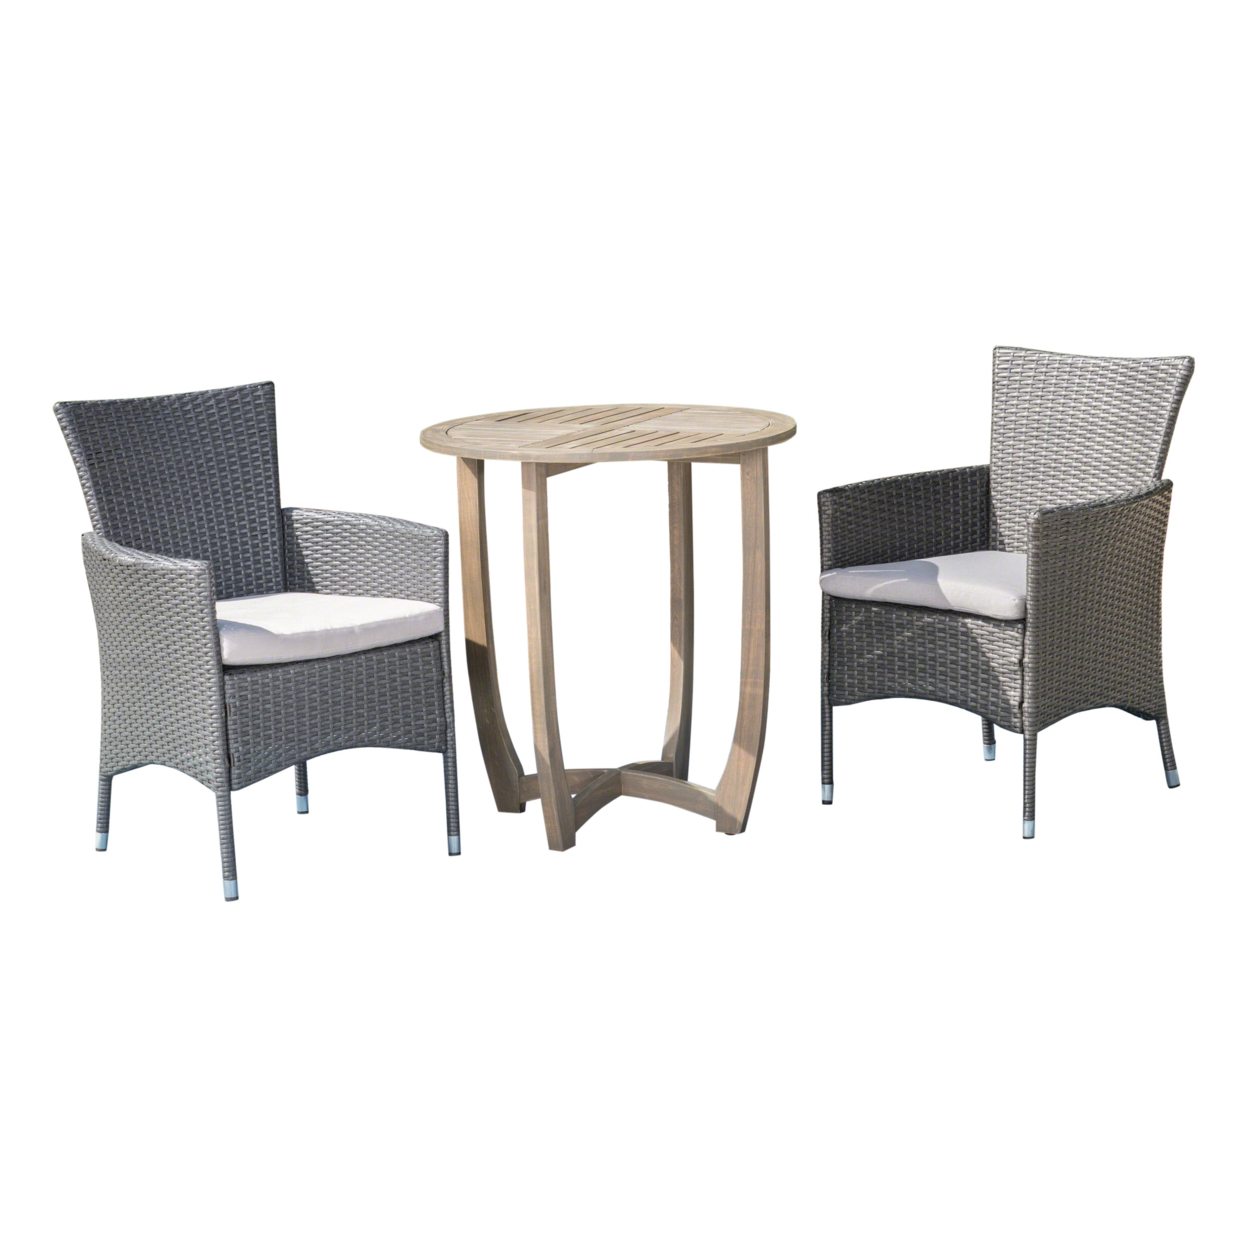 Lori Outdoor 3 Piece Wood And Wicker Bistro Set, Gray And Gray